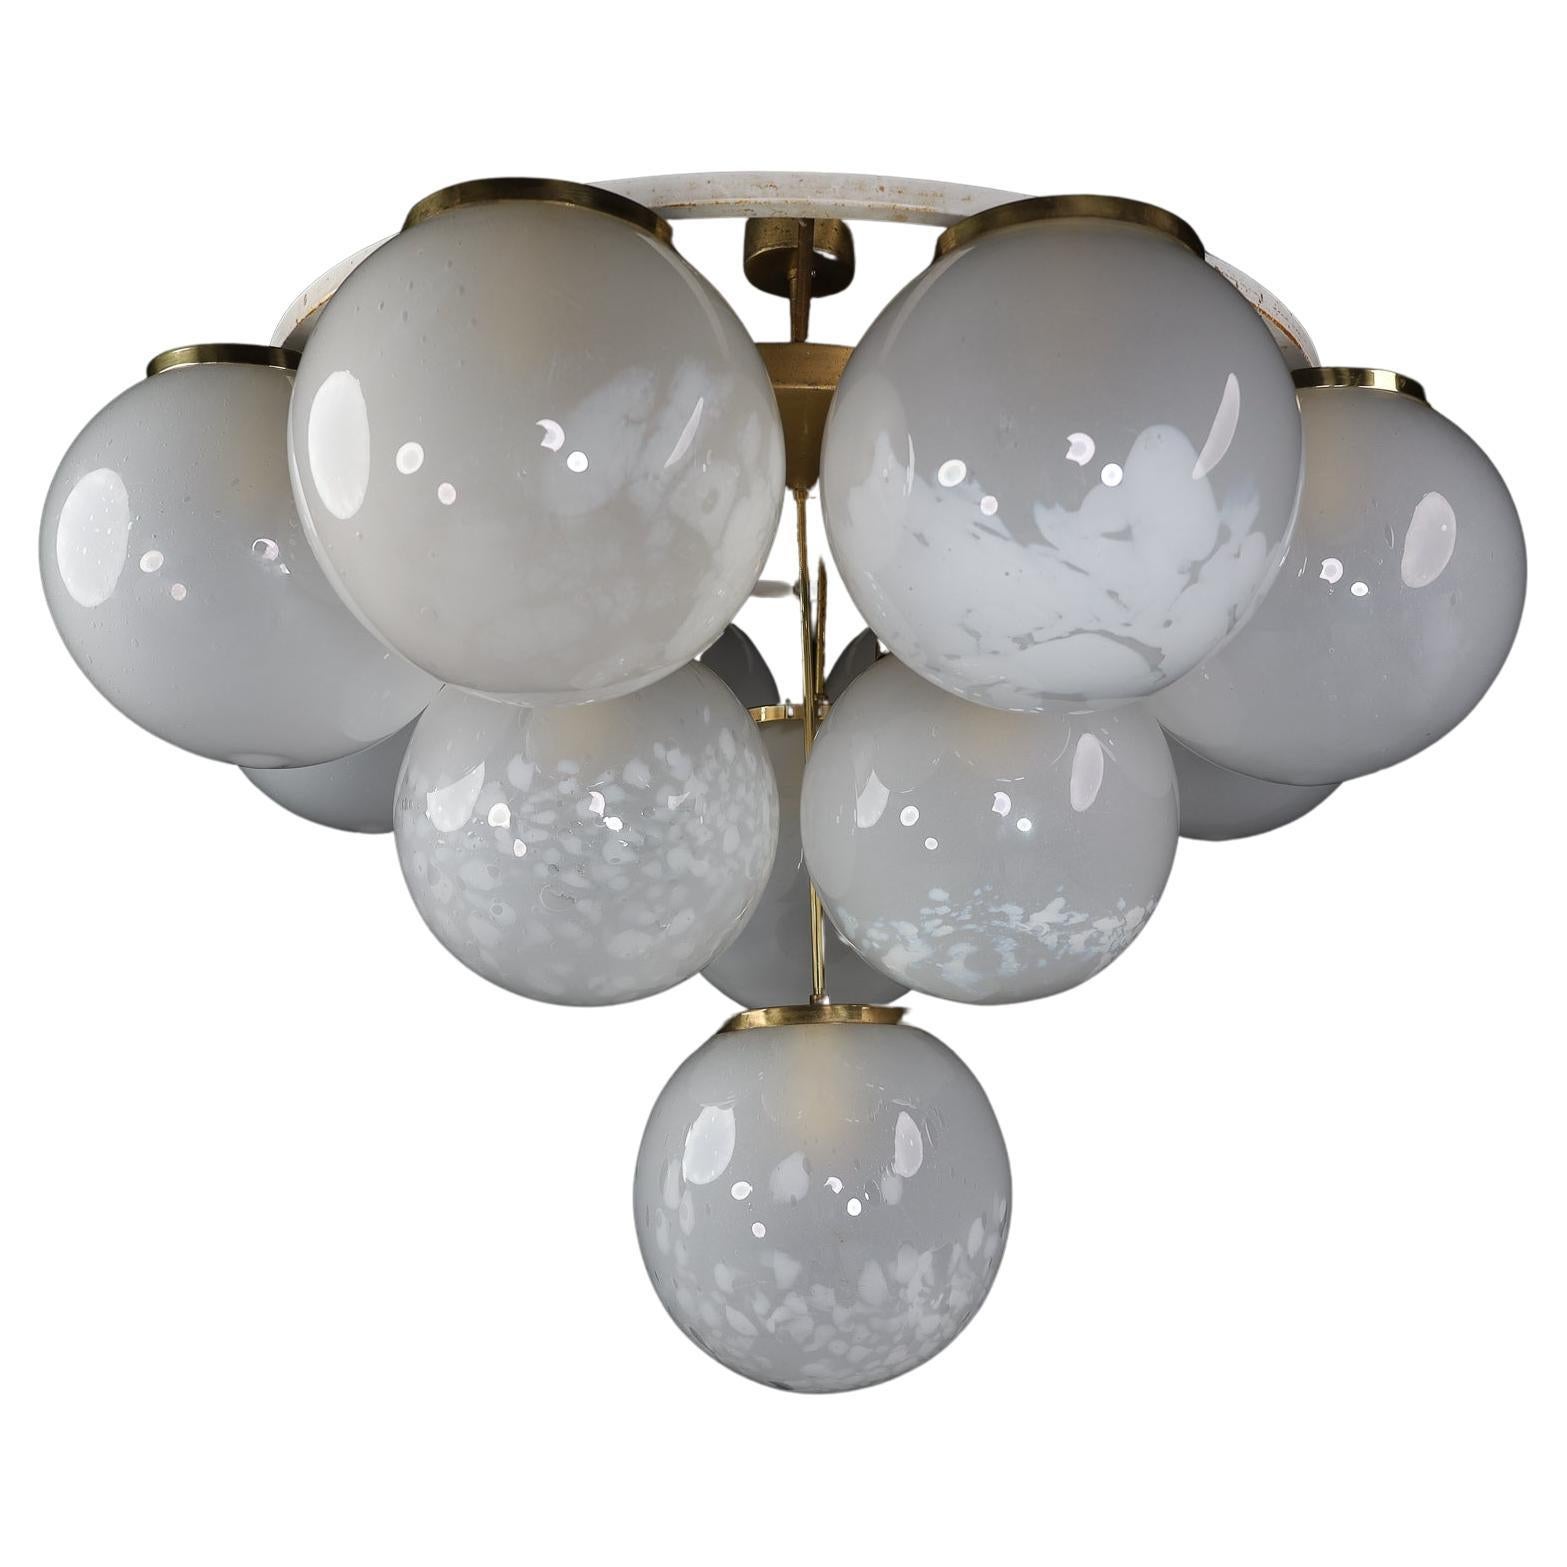 Mid-Century Modern chandelier/Flush Mount With Large frosted Globes, Italy 1960s

Flush mount - chandelier (diameter 110 cm) with hand-blowed frosted glass globes with brass details, produced and designed in Italy in the 1960s. 12 large hand-blew